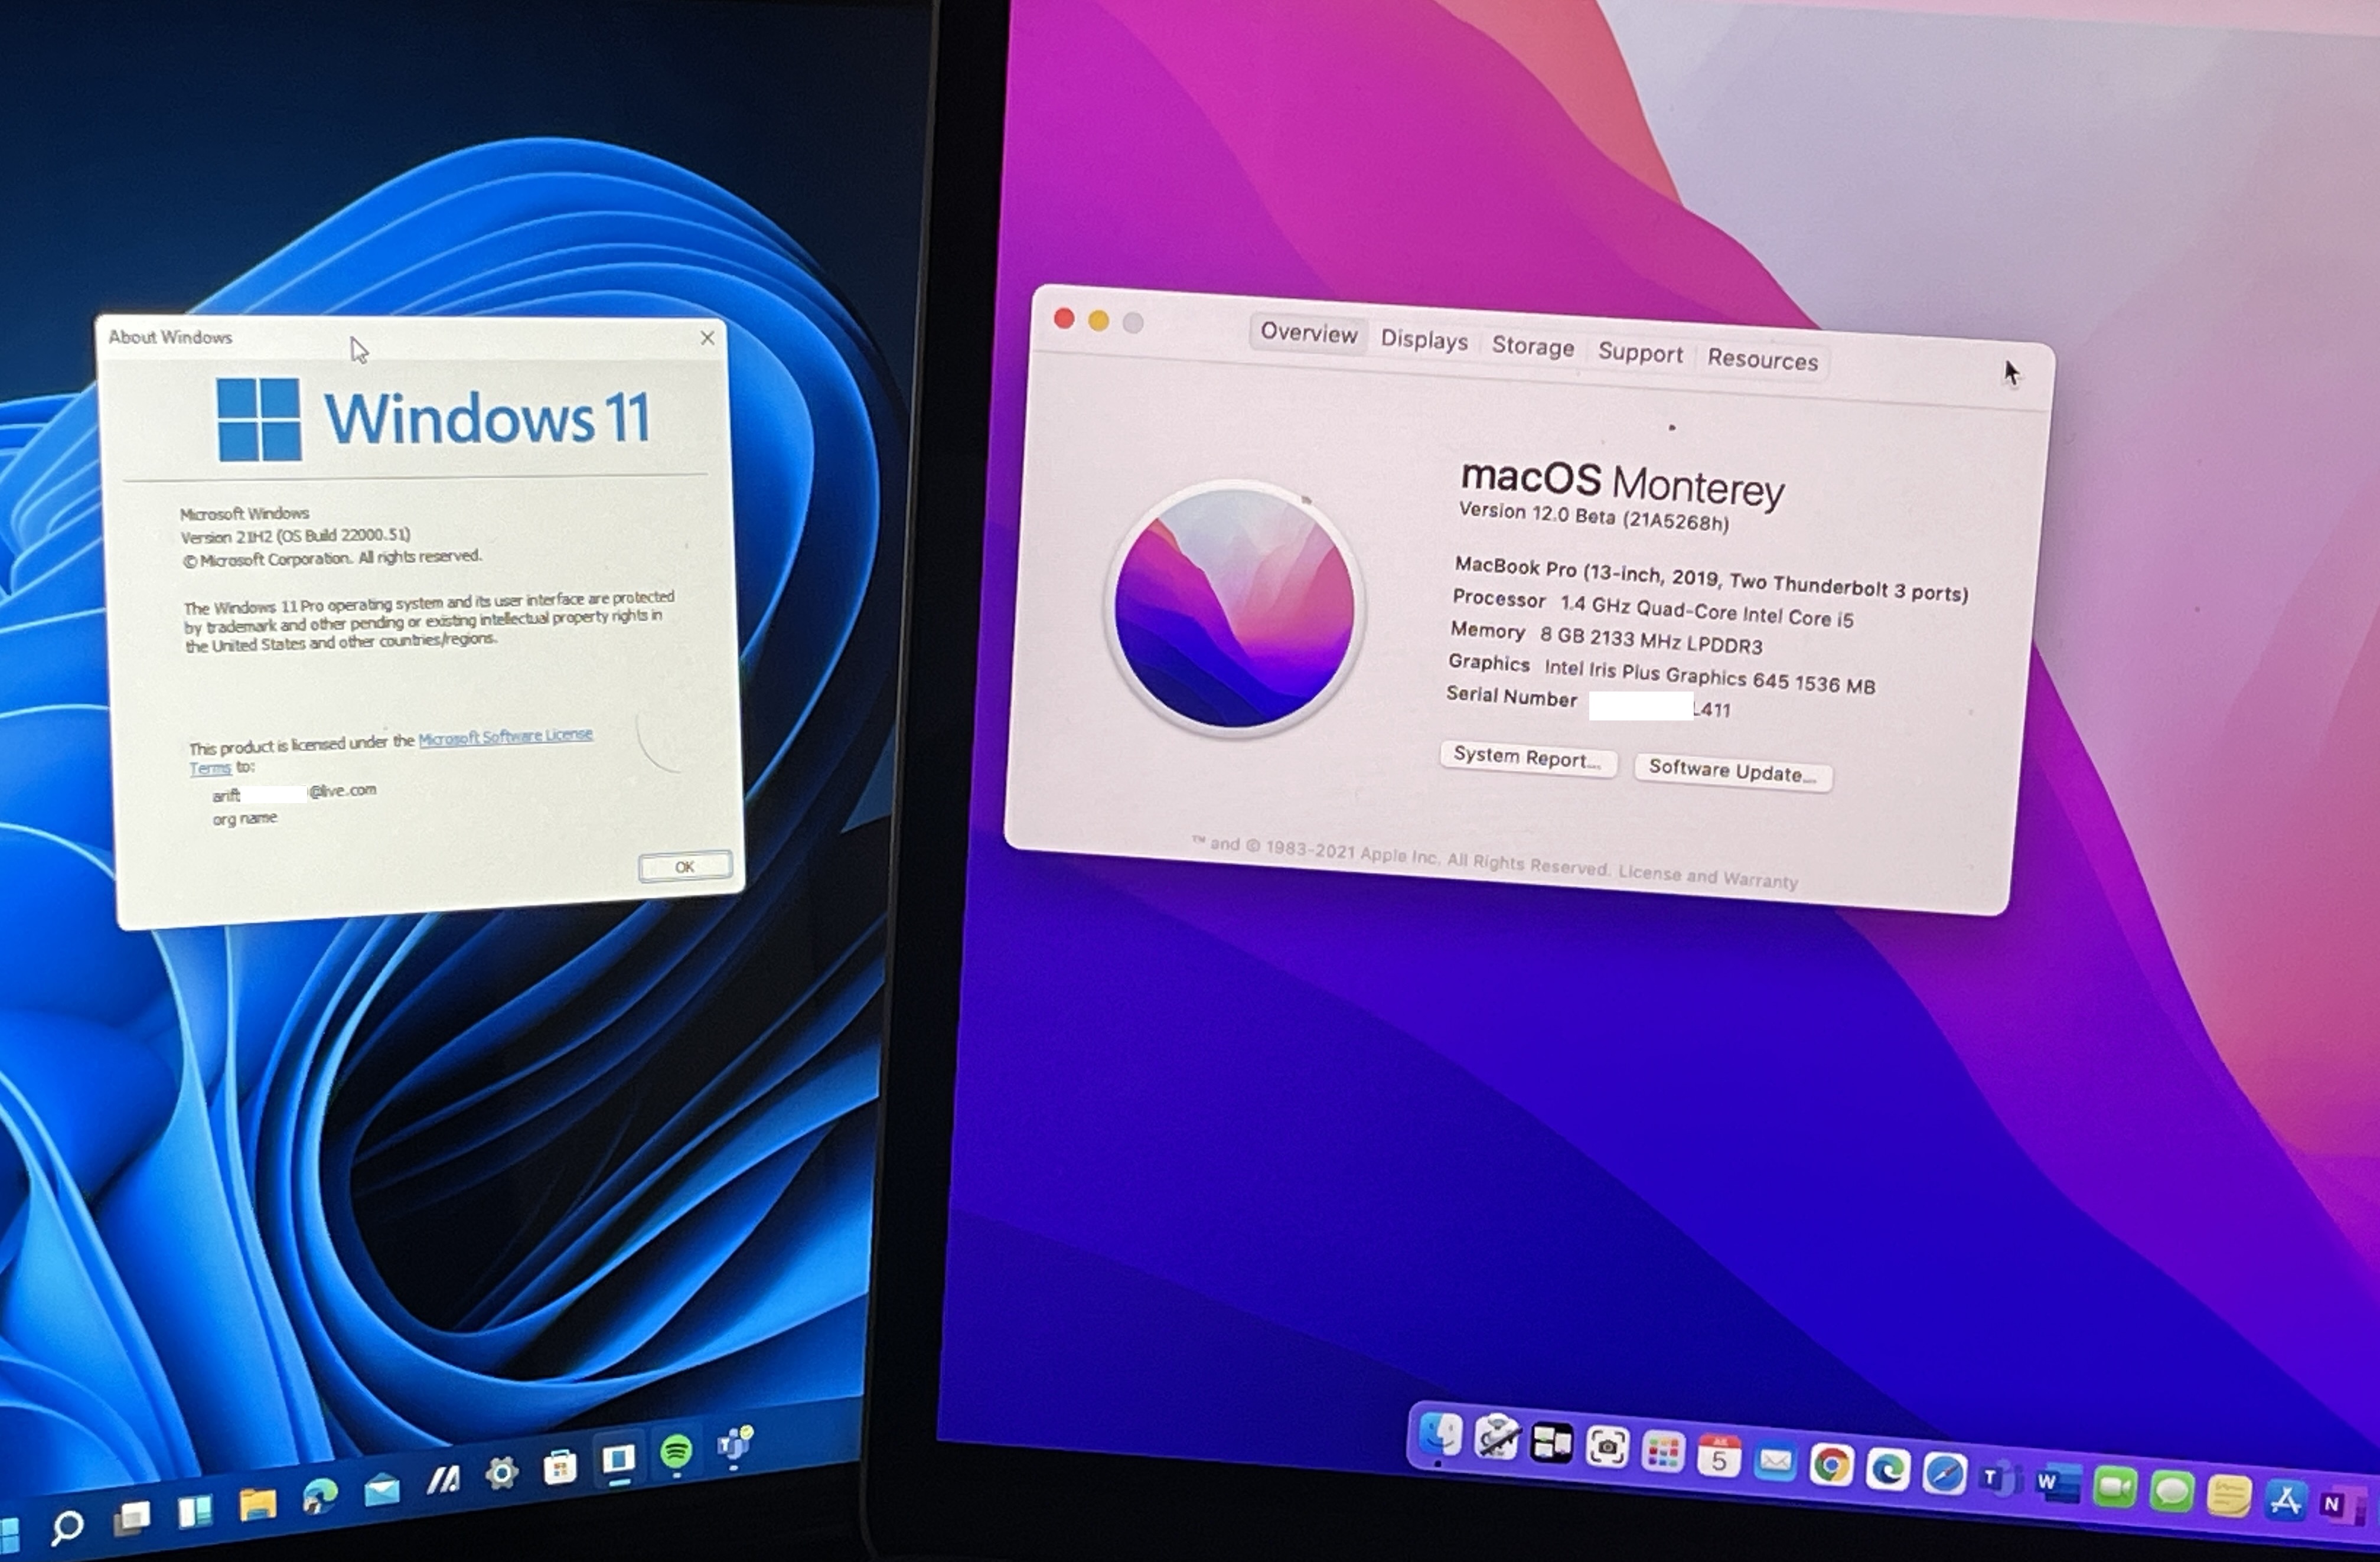 Why macOS is better than Windows?